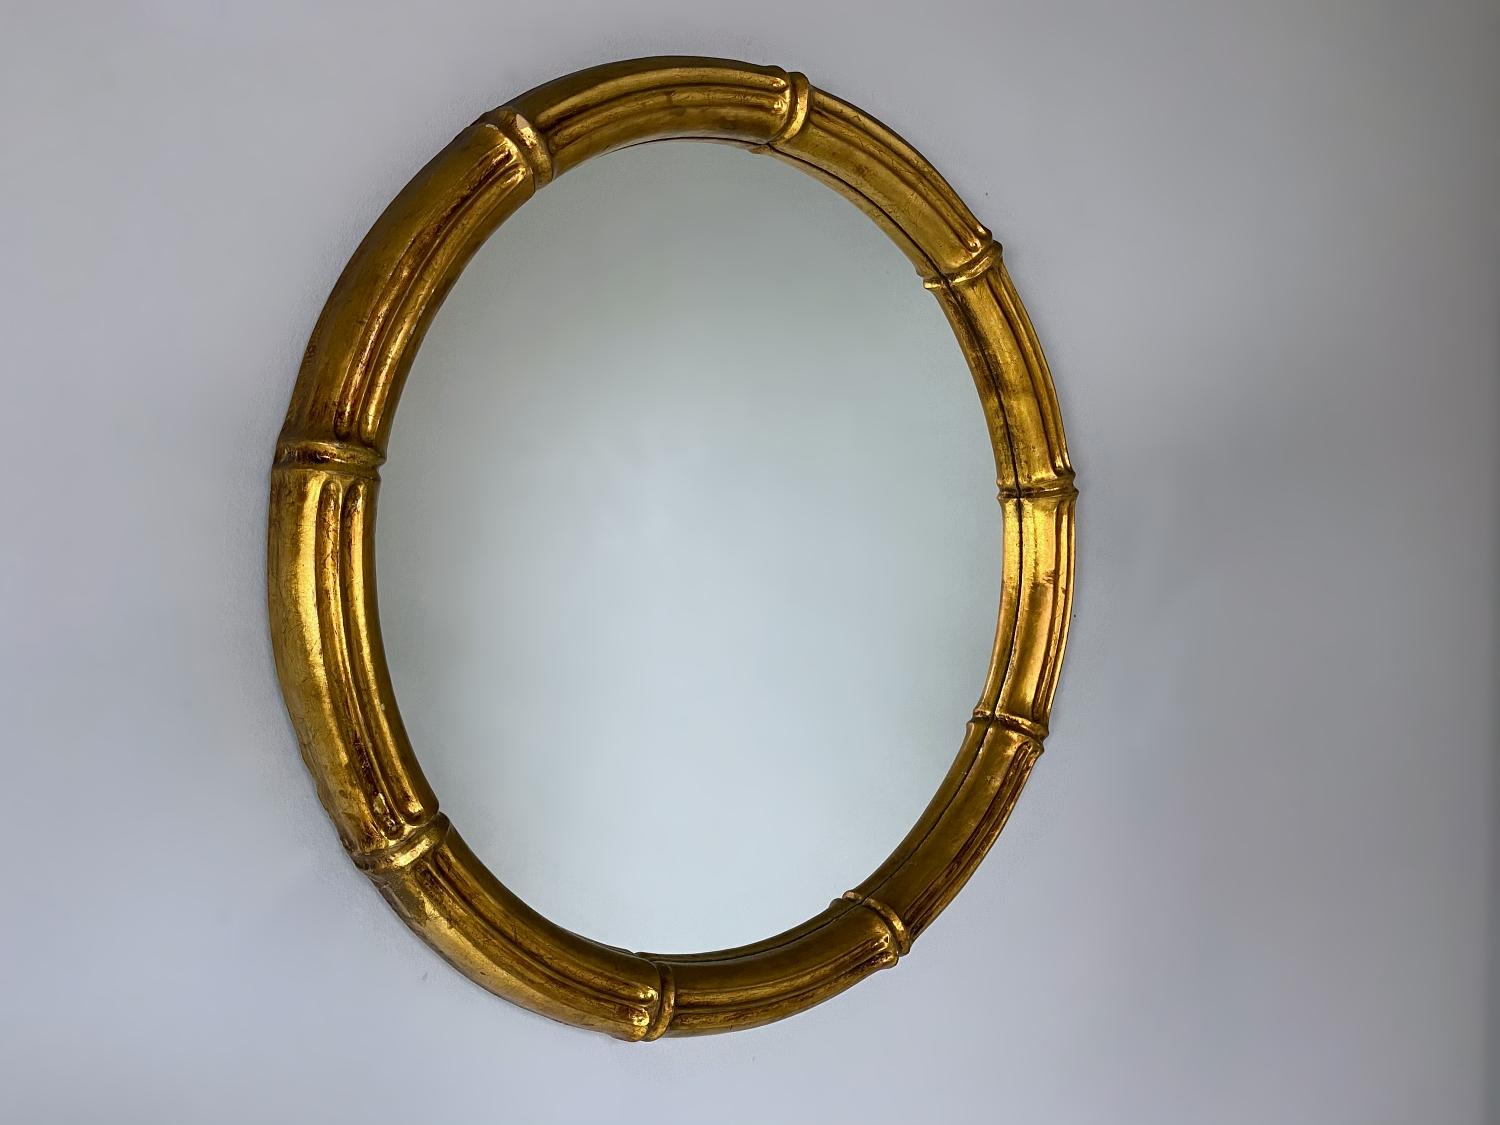 Sculptural, handcrafted giltwood faux bamboo round wall mirror made and labeled by Max Welz in the 1940s, Austria. The mirror is in very good condition.
We love to create the illusion of space and decorate any room in contemporary style with such a